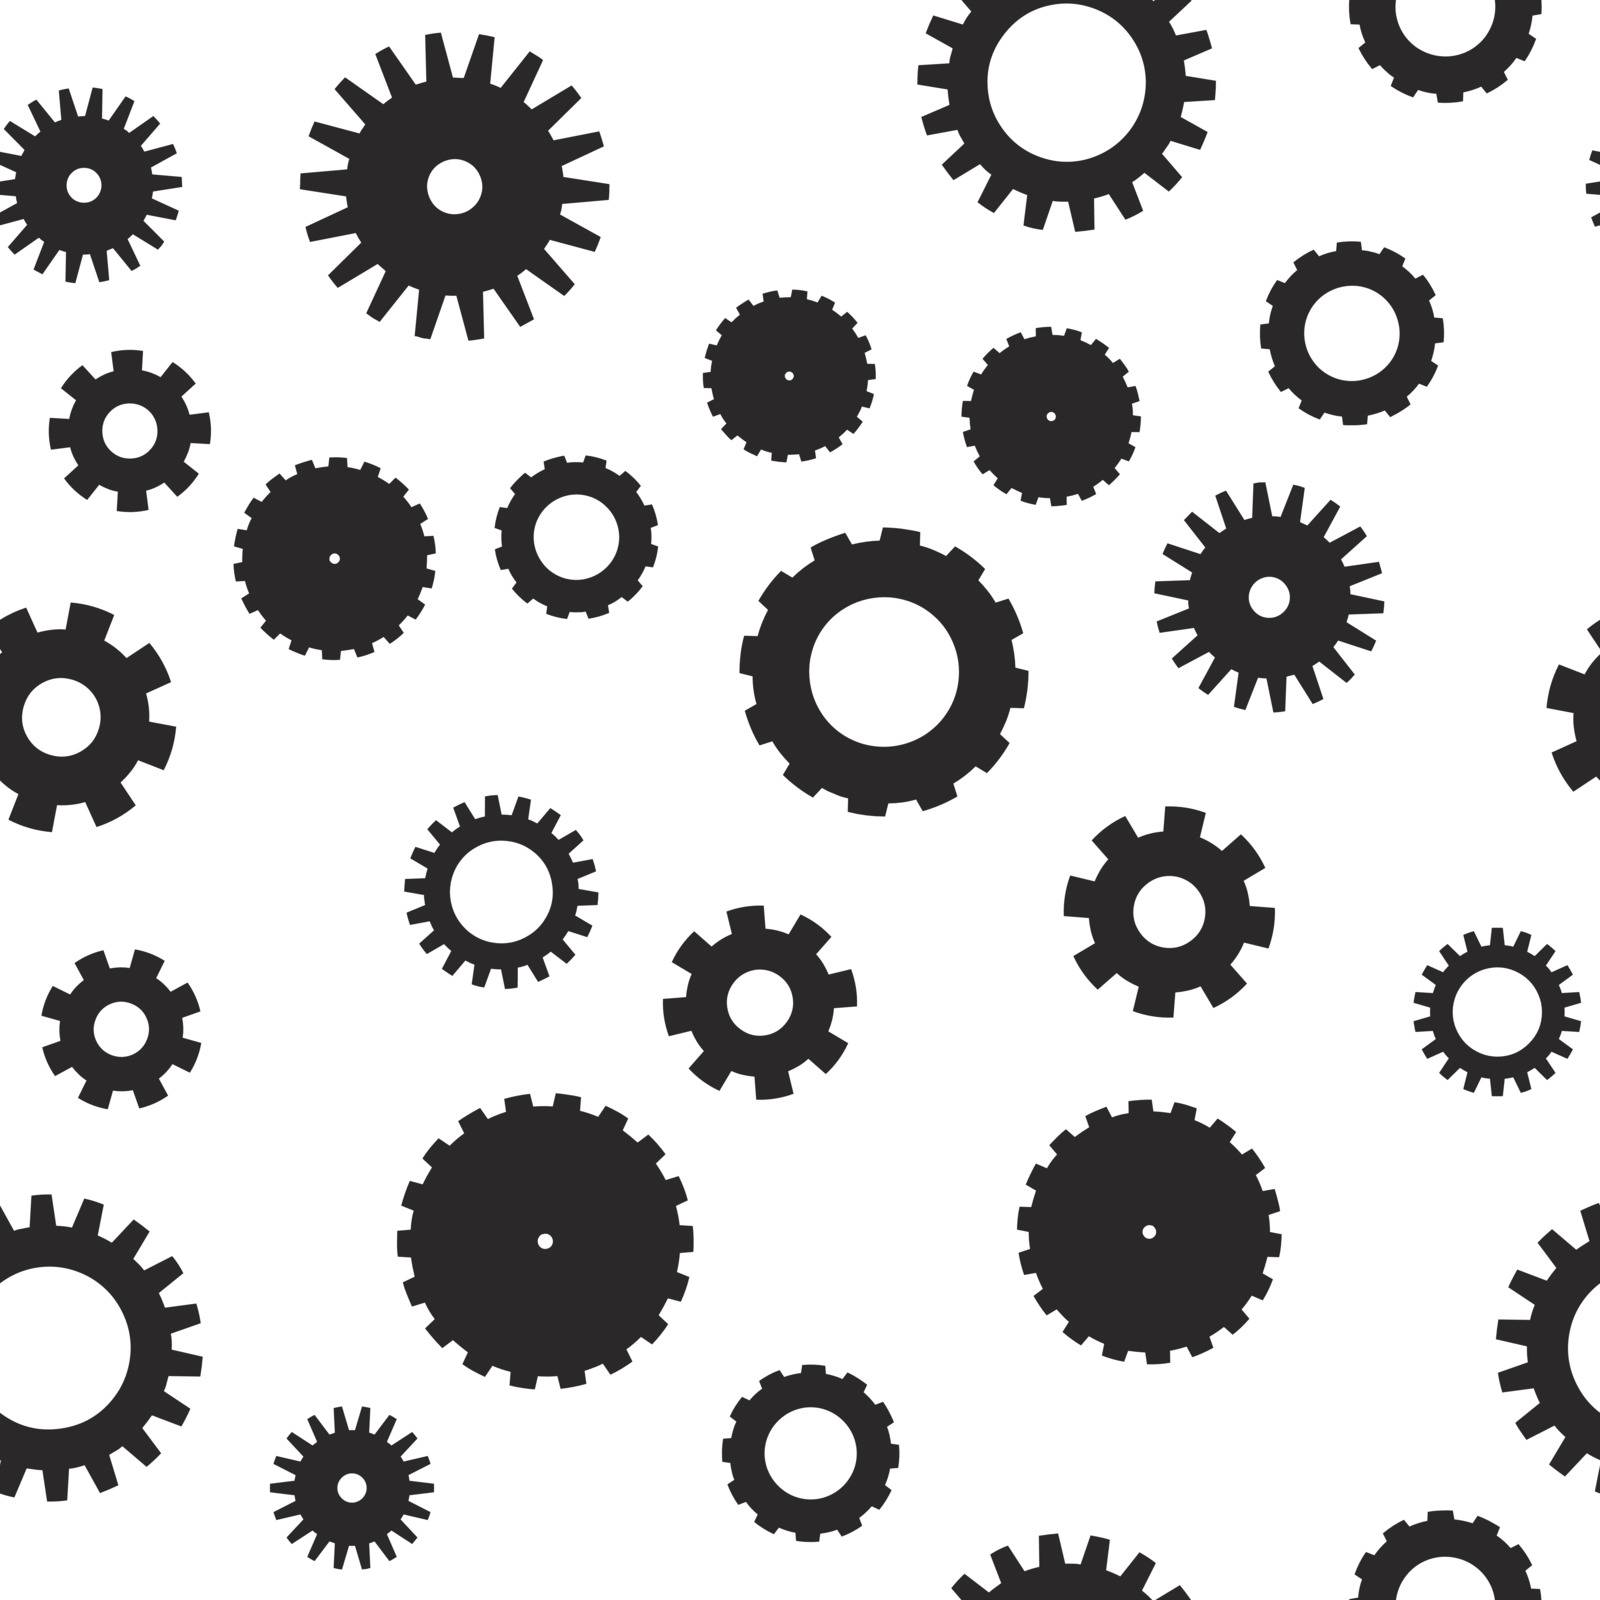 Cog wheel seamless pattern. Clockwork, technological or industrial theme. Flat vector background in black and white by pyty